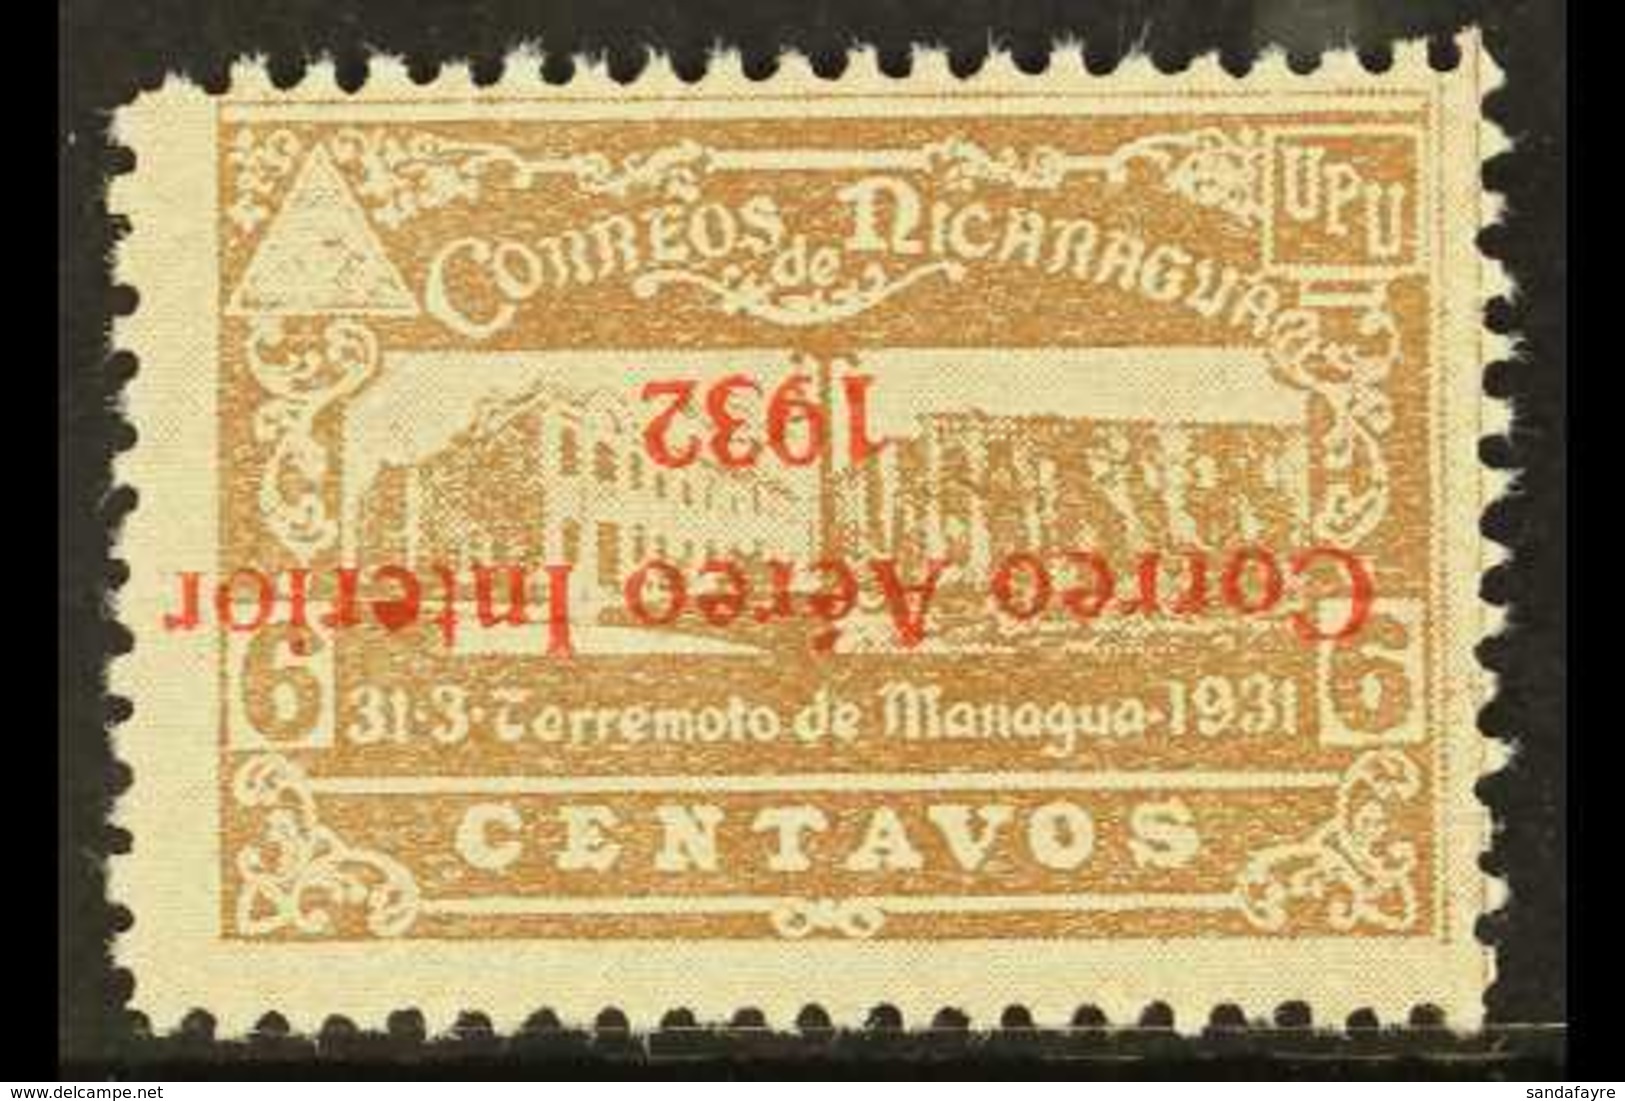 1932 6c Grey-brown With INVERTED OVERPRINT, Scott C37a, Unused, No Gum As Issued And Never Hinged. For More Images, Plea - Nicaragua